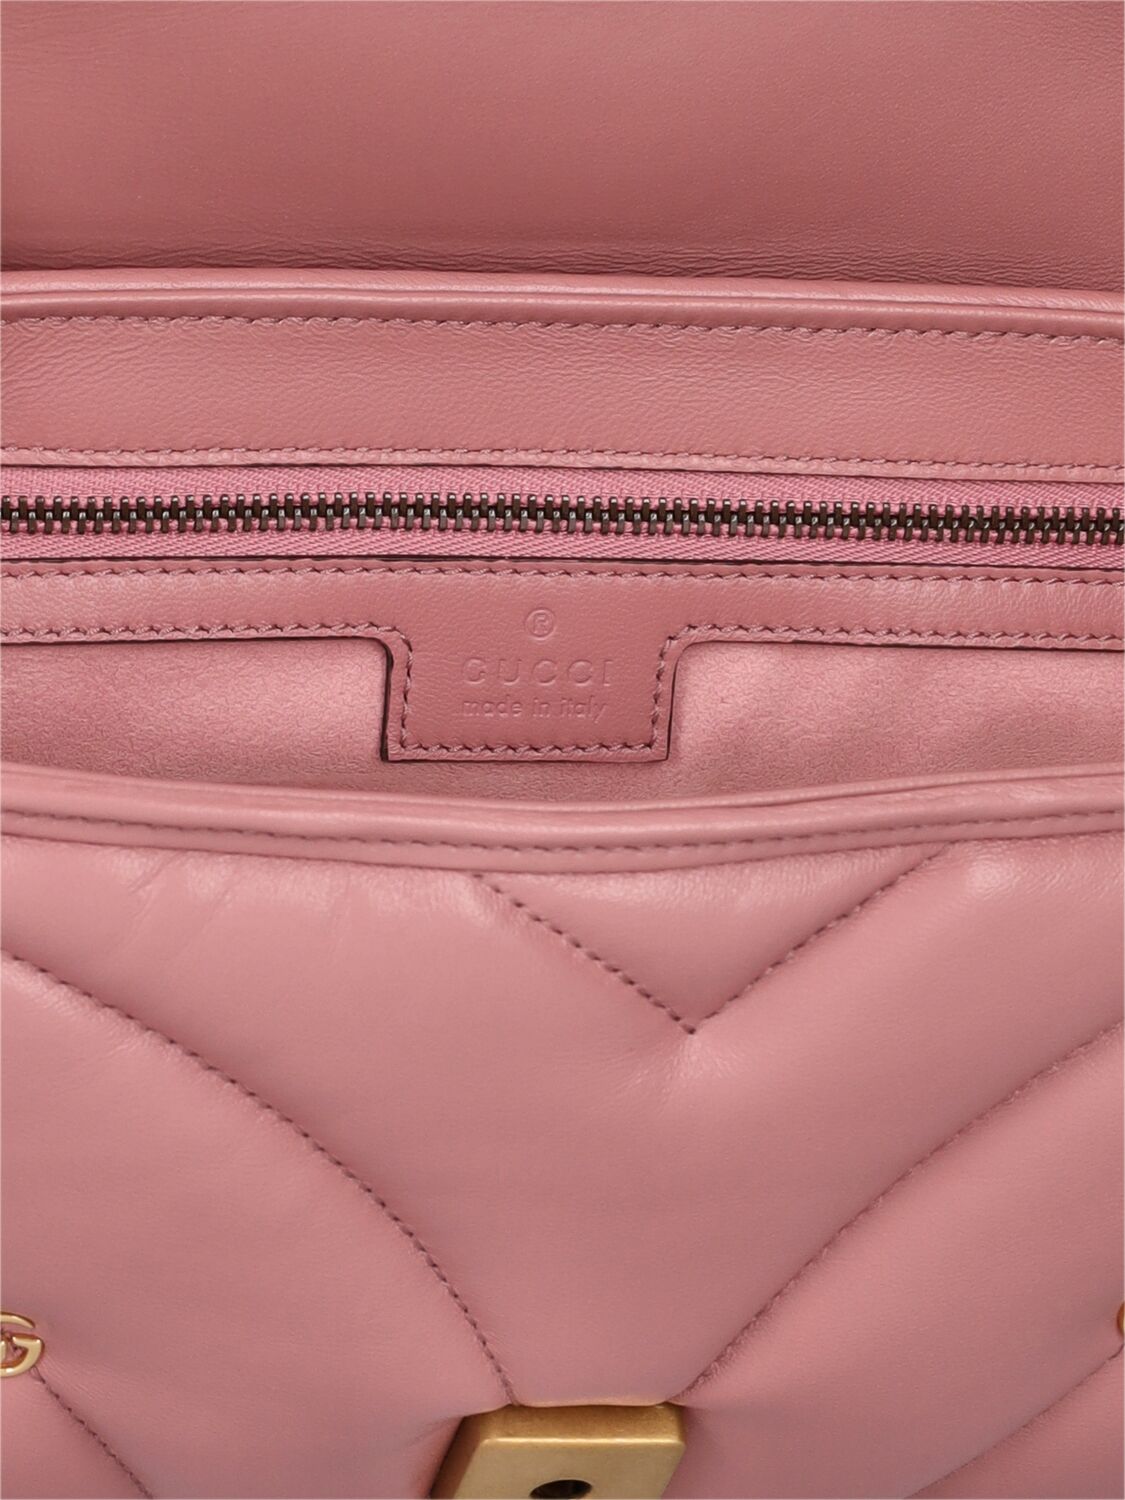 Shop Gucci Small Gg Marmont Leather Shoulder Bag In Rose